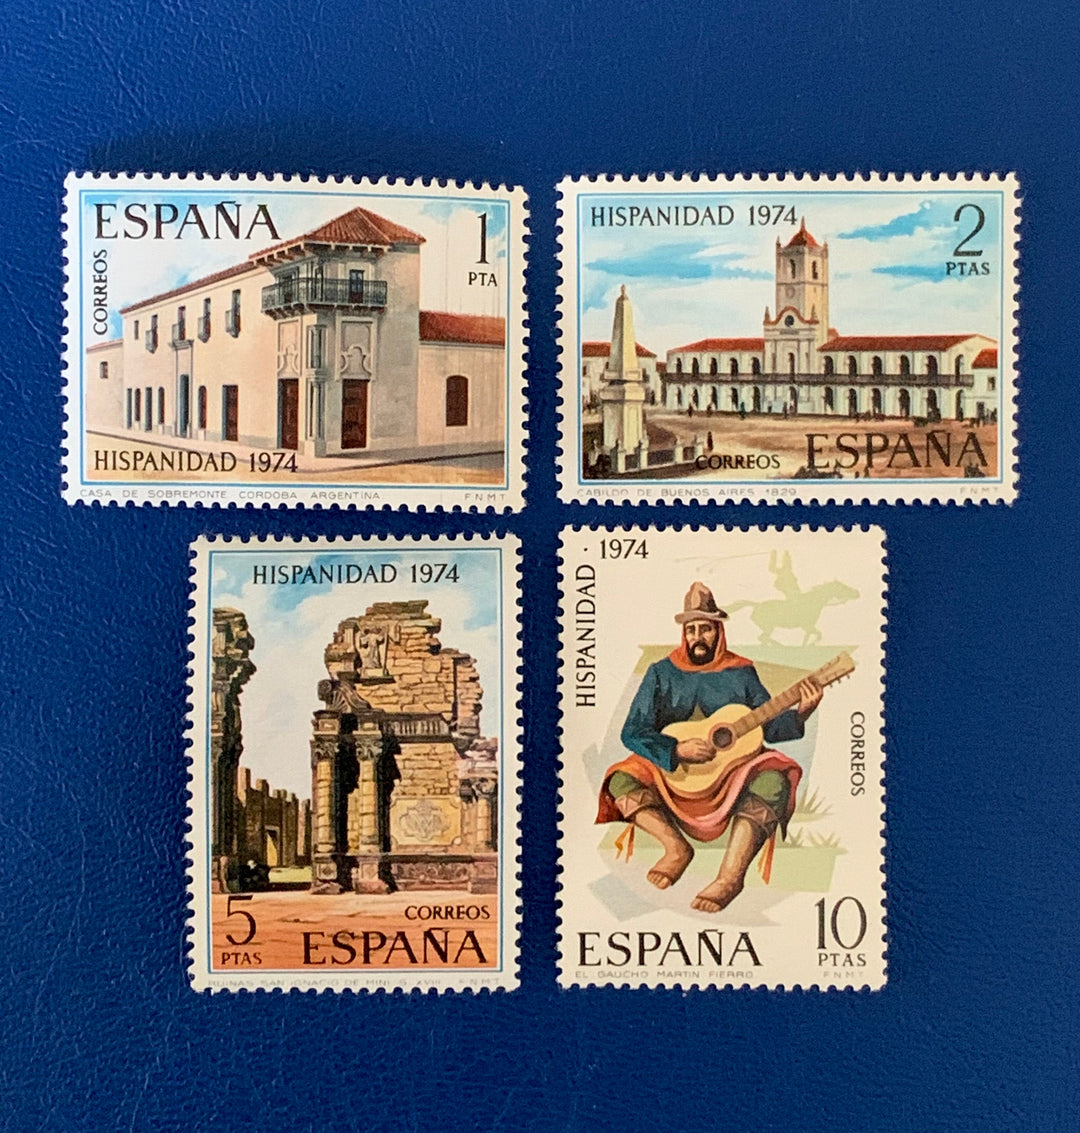 Spain - Original Vintage Postage Stamps- 1974 Hispanic Heritage - for the collector, artist or crafter - Scrapbooking, decoupage, collage